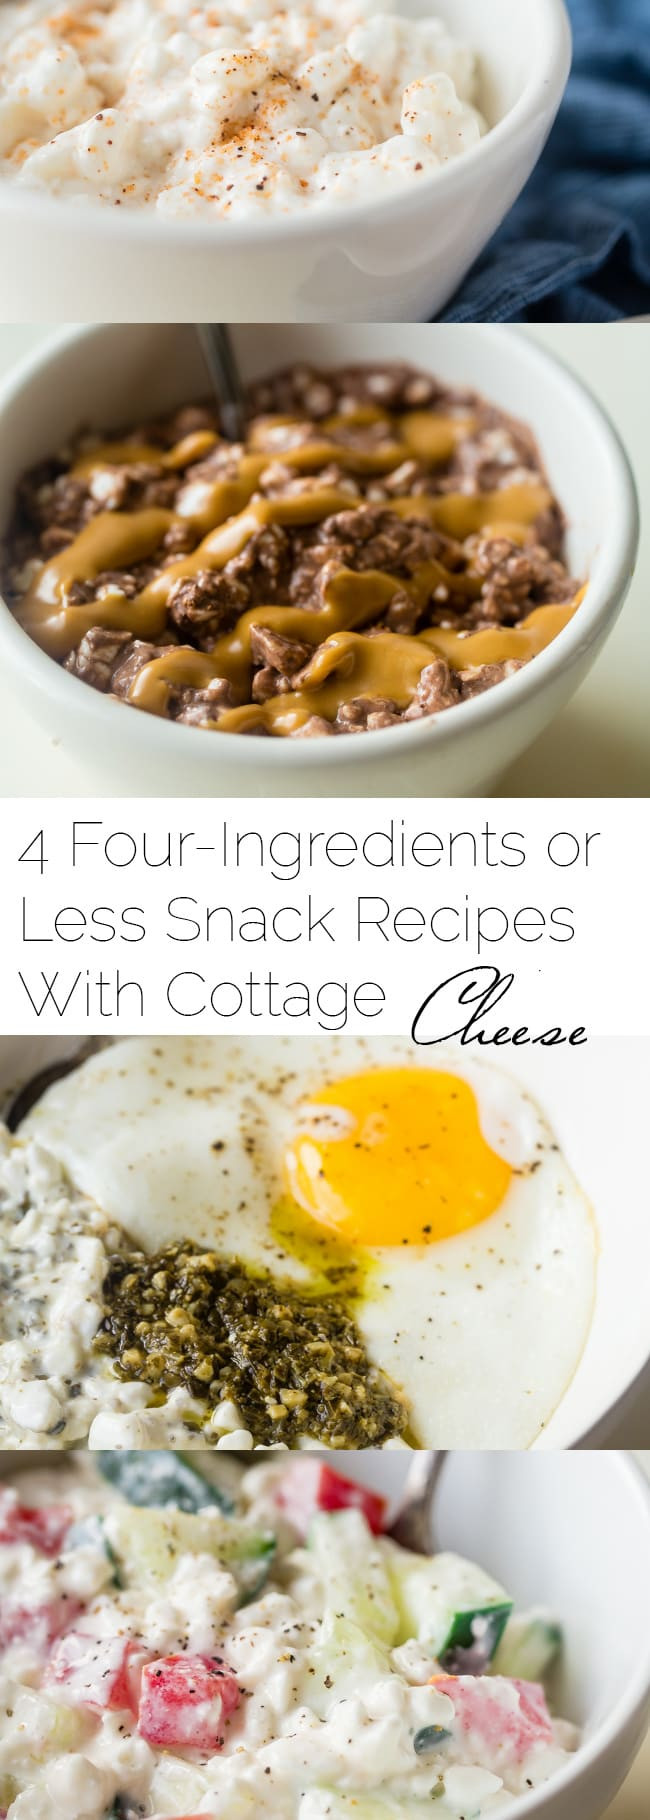 Healthy Cottage Cheese Snacks
 Healthy Snack Recipes with Cottage Cheese